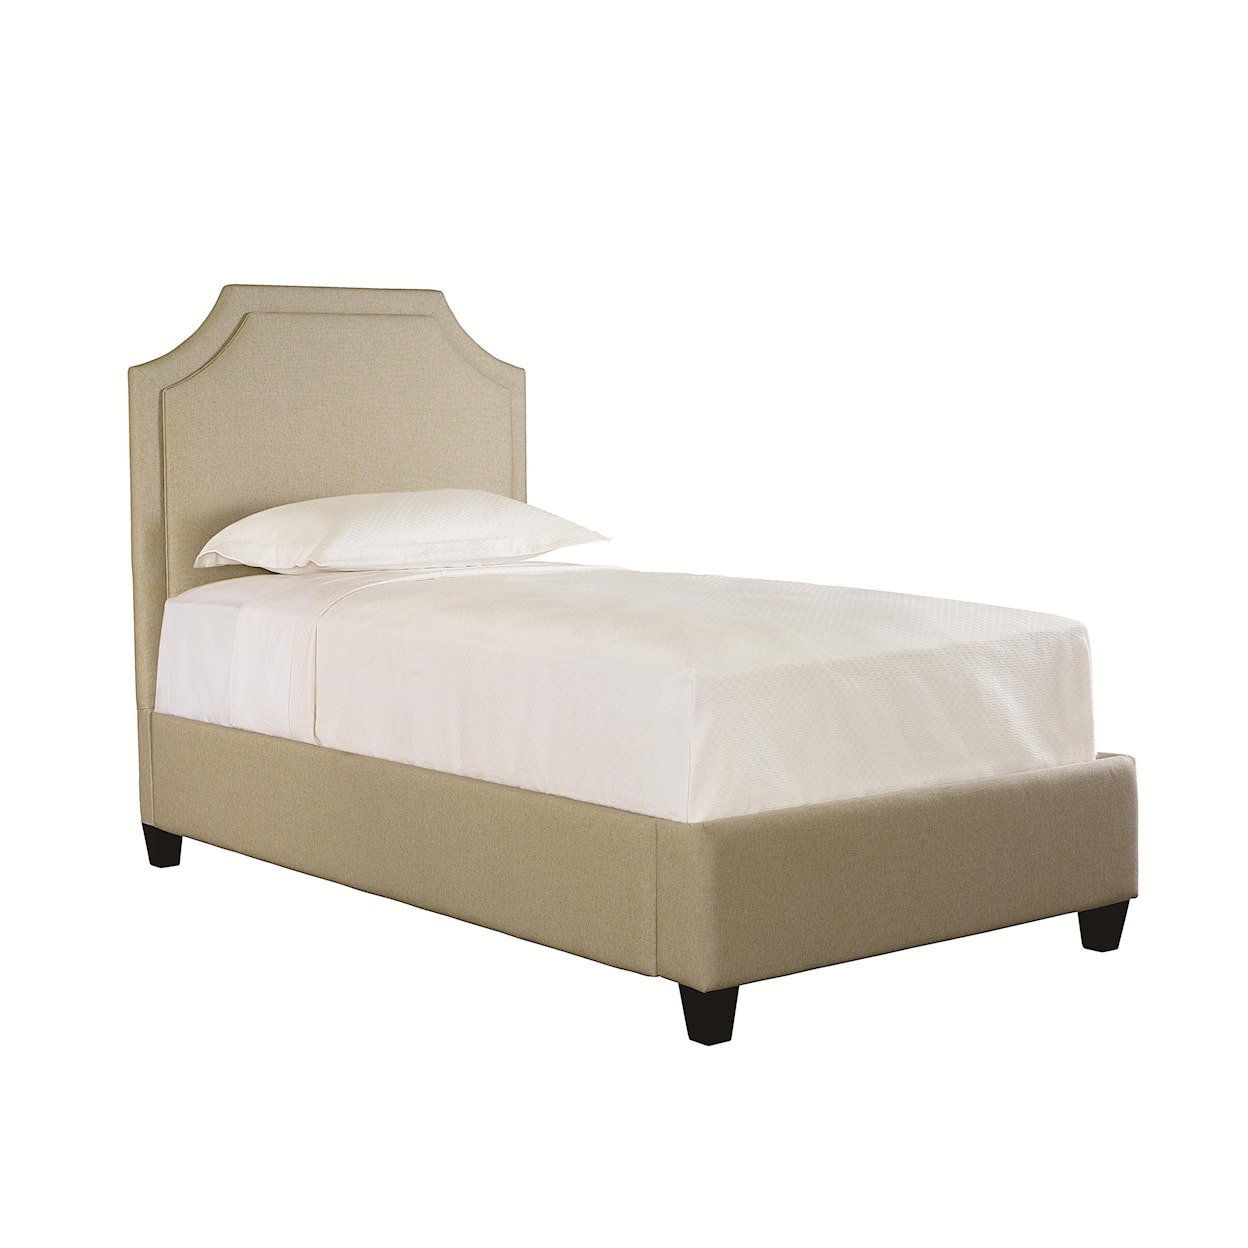 Bassett Custom Upholstered Beds Twin Florence Upholstered Bed with Low FB